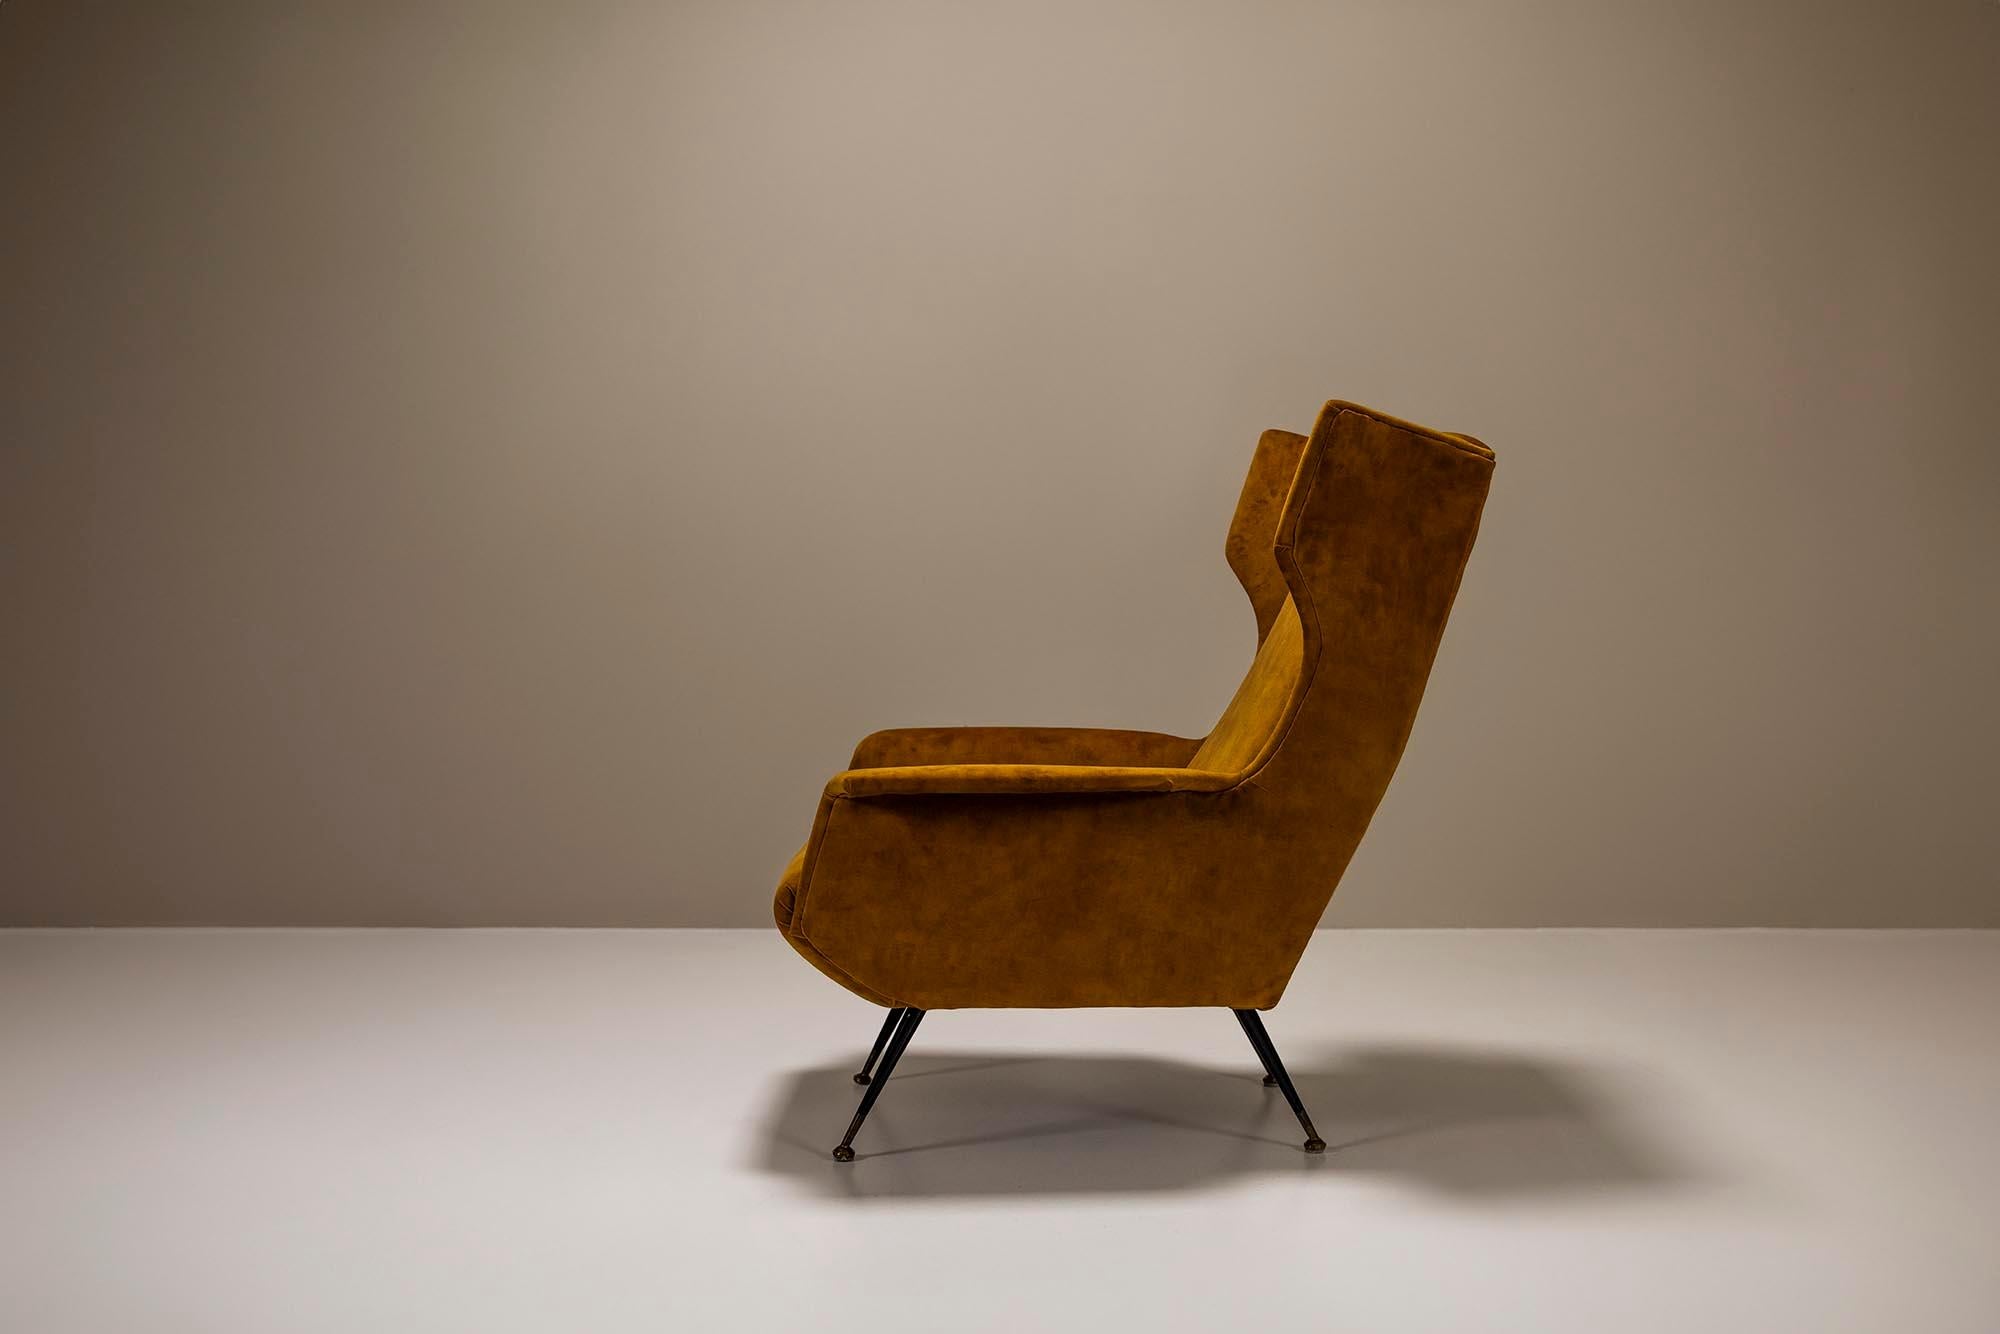 This typical Italian lounge chair communicates simplicity through cut shapes and a slender base that is so characteristic of armchairs from the 1950s.The design of the exceptionally comfortable body of the chair is clearly based on the traditional